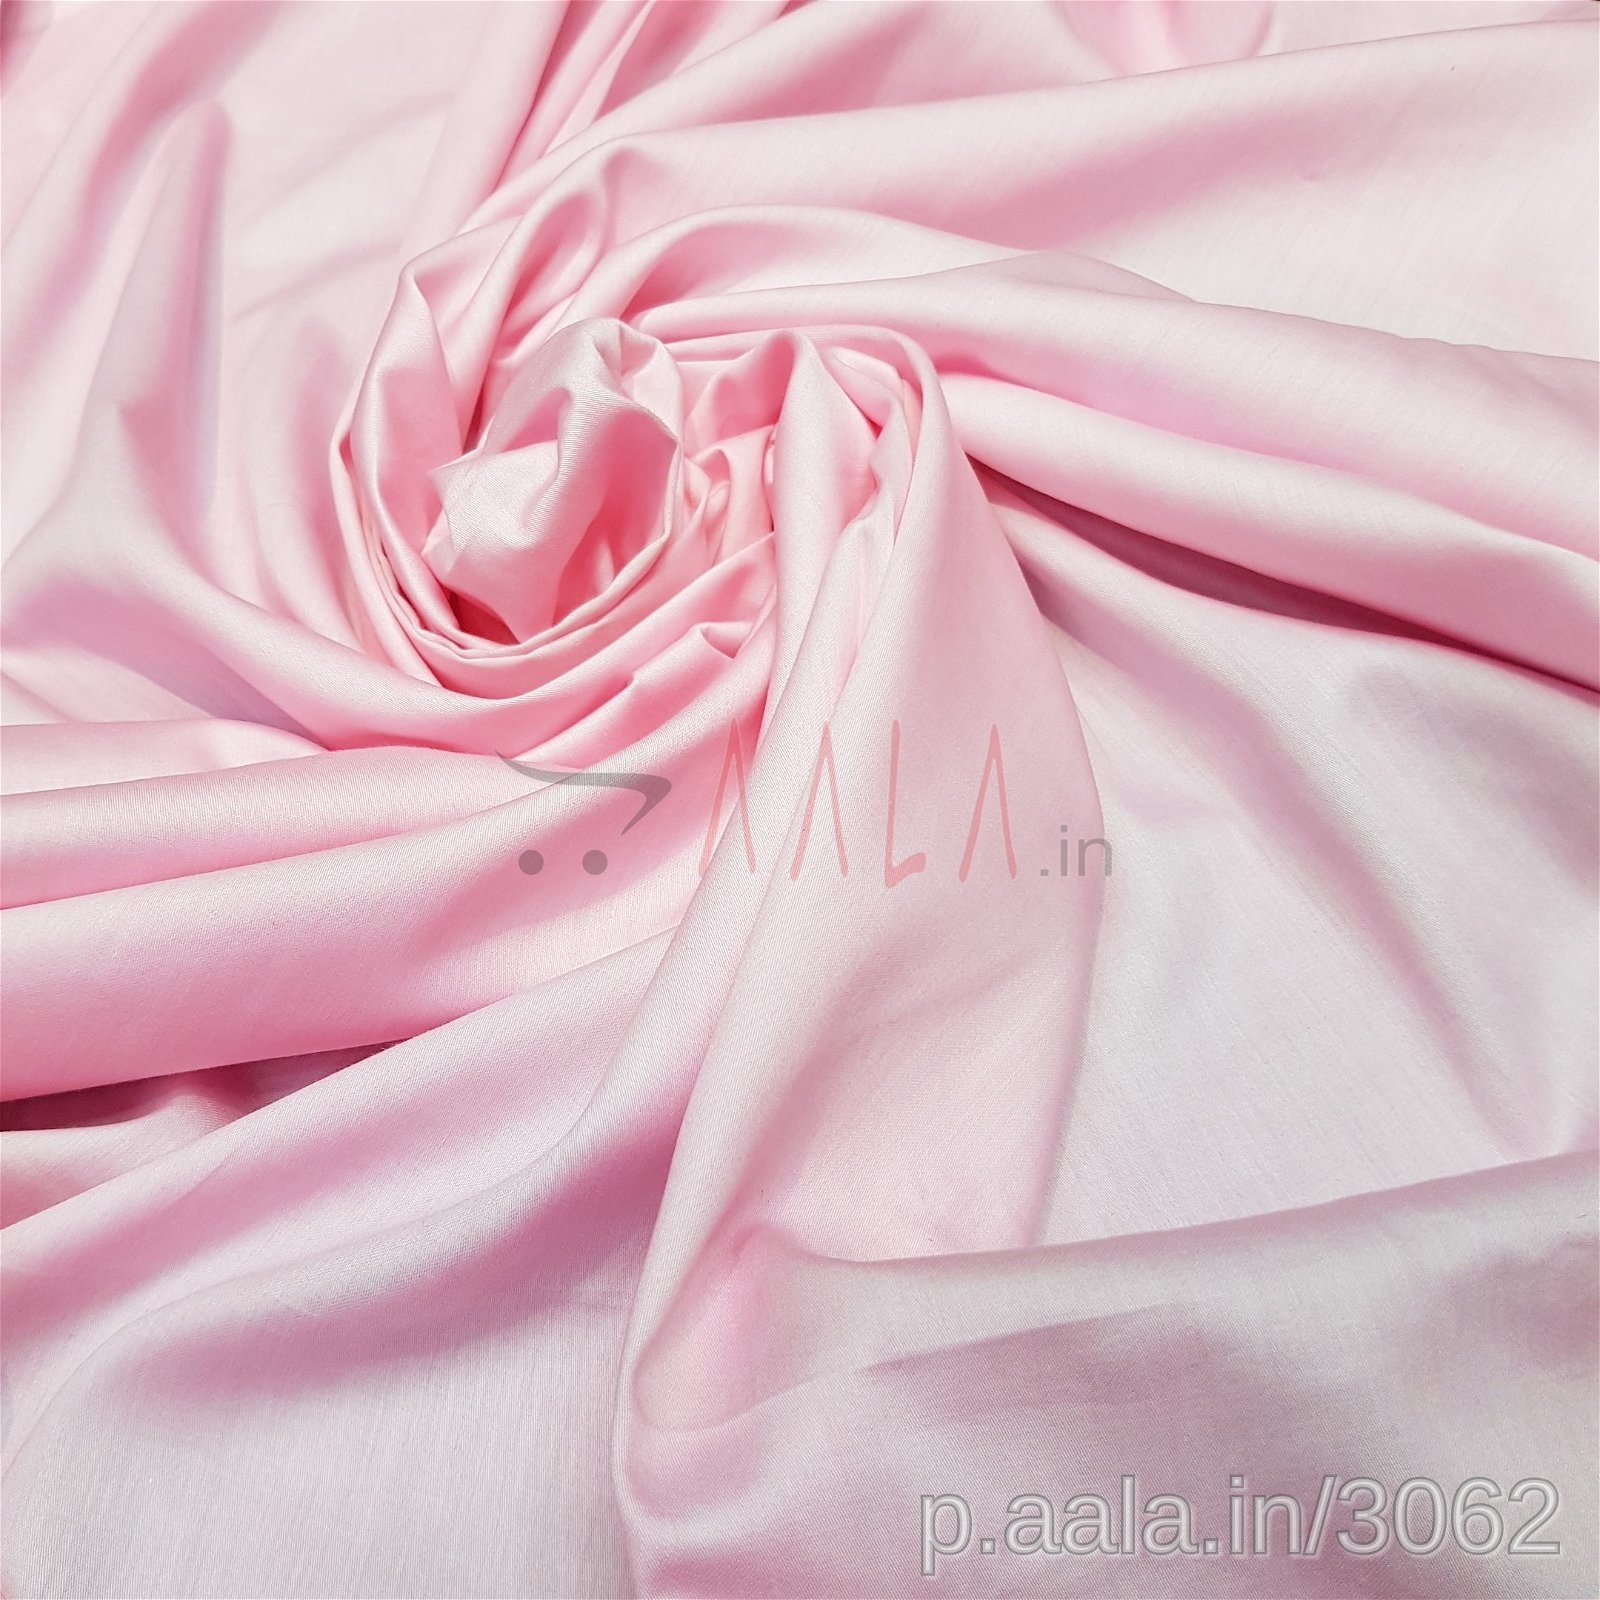 Satin Cotton 44 Inches Dyed Per Metre #3062